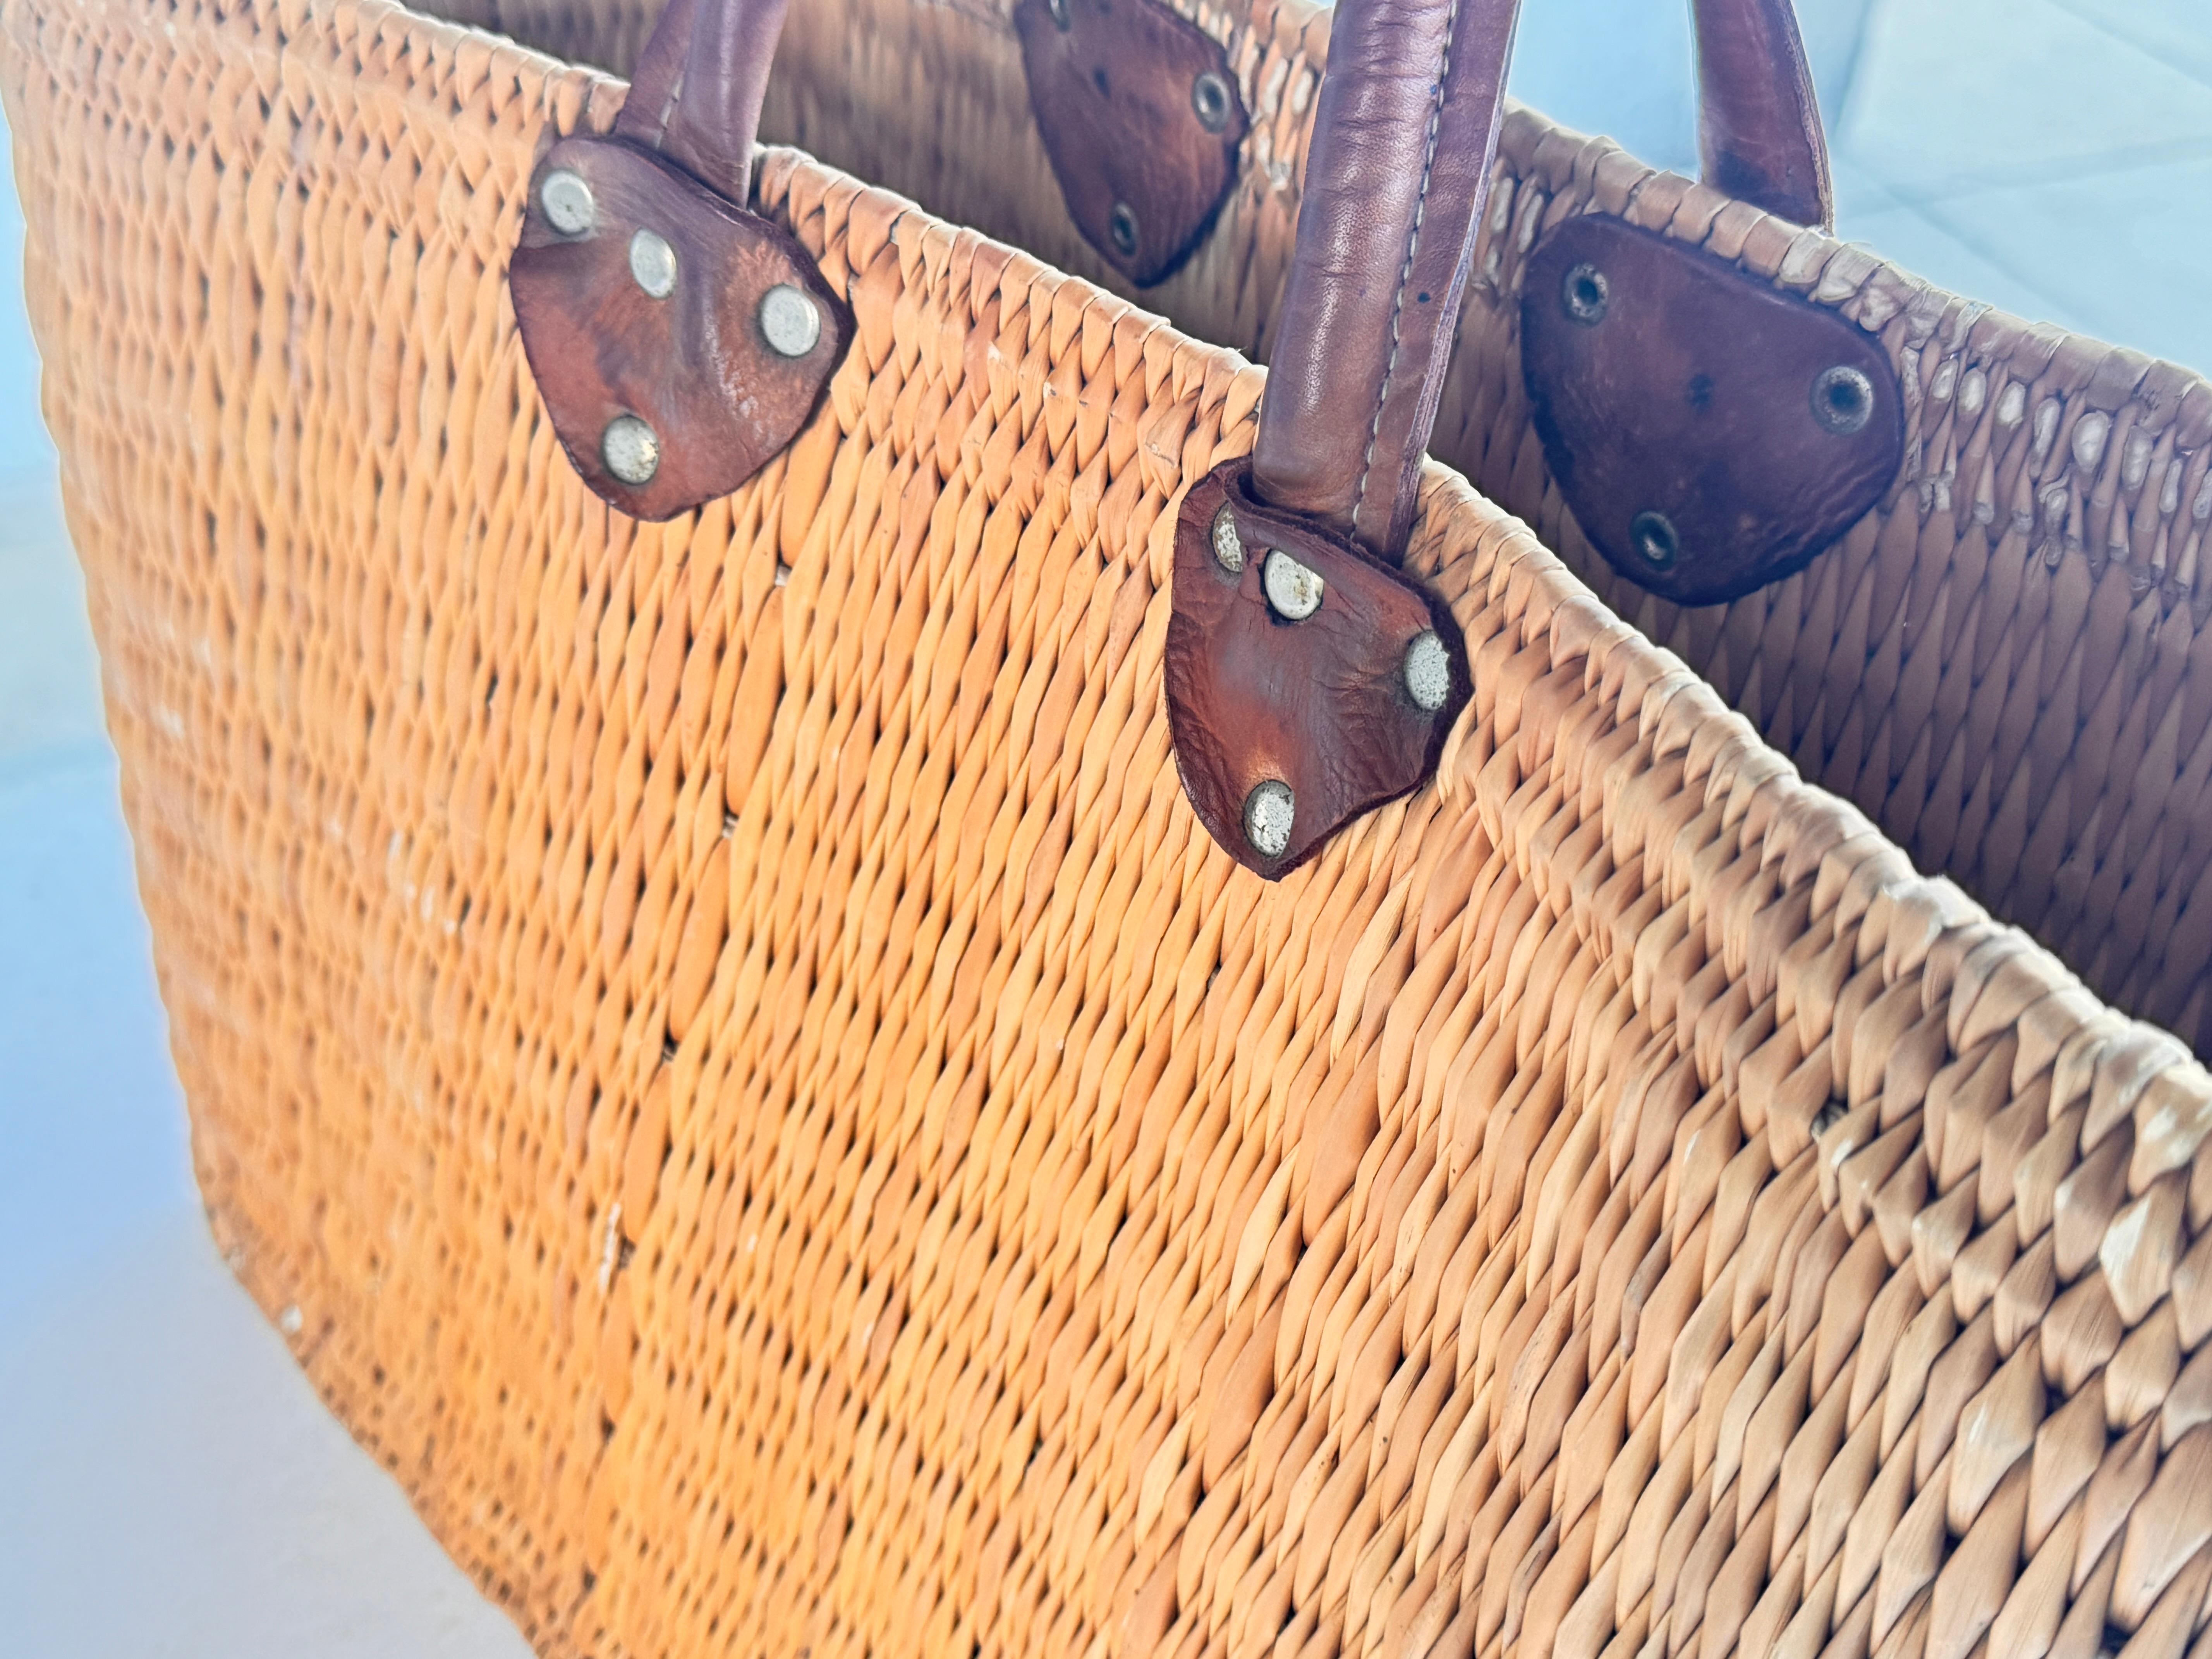 Late 20th Century Vintage French Wicker Basket, Gold Color Stitched Leather Bag Handles France For Sale